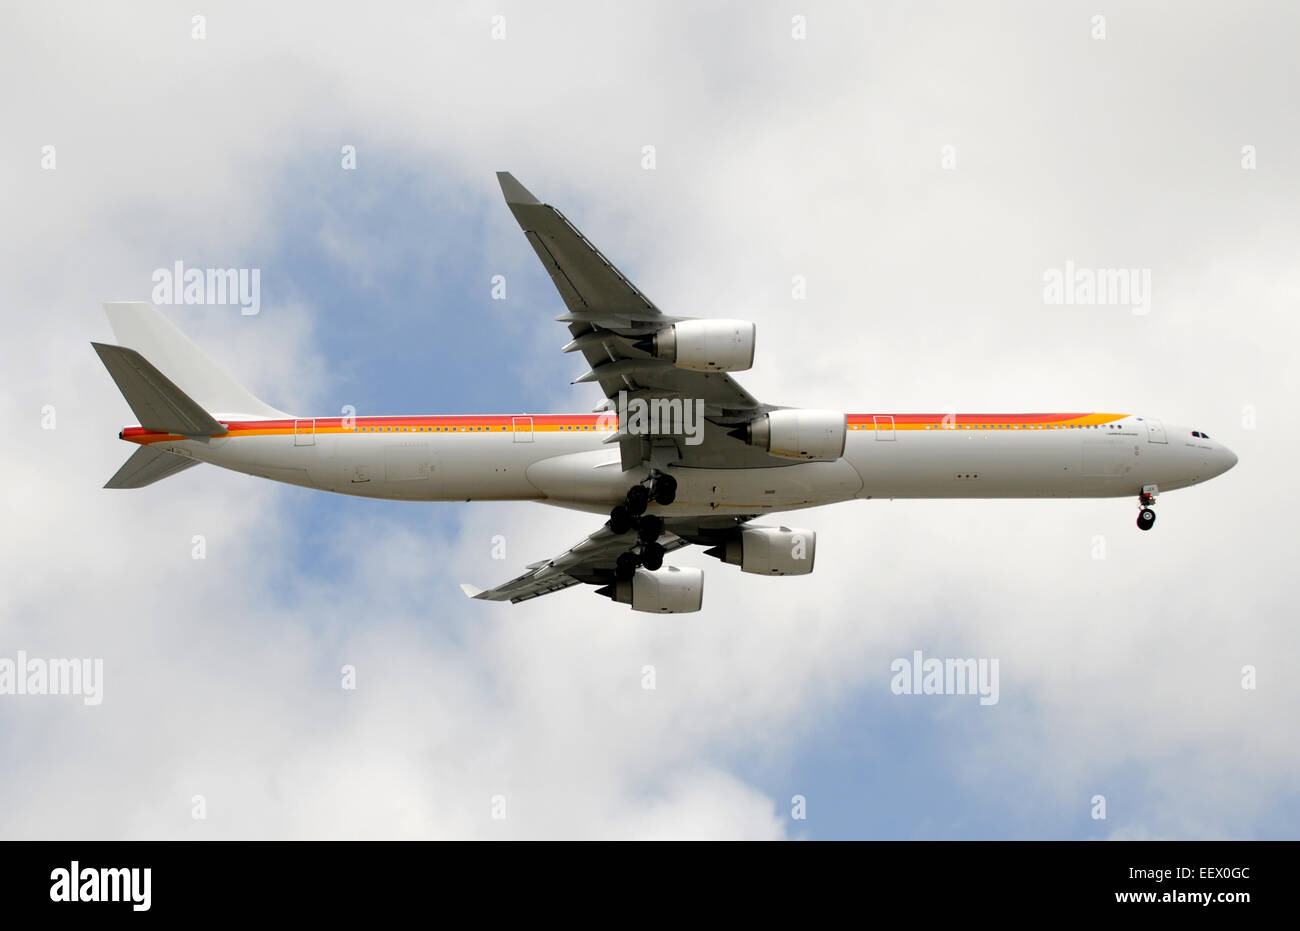 Modern passenger jet airplane in mid flight Airbus A-340 Stock Photo